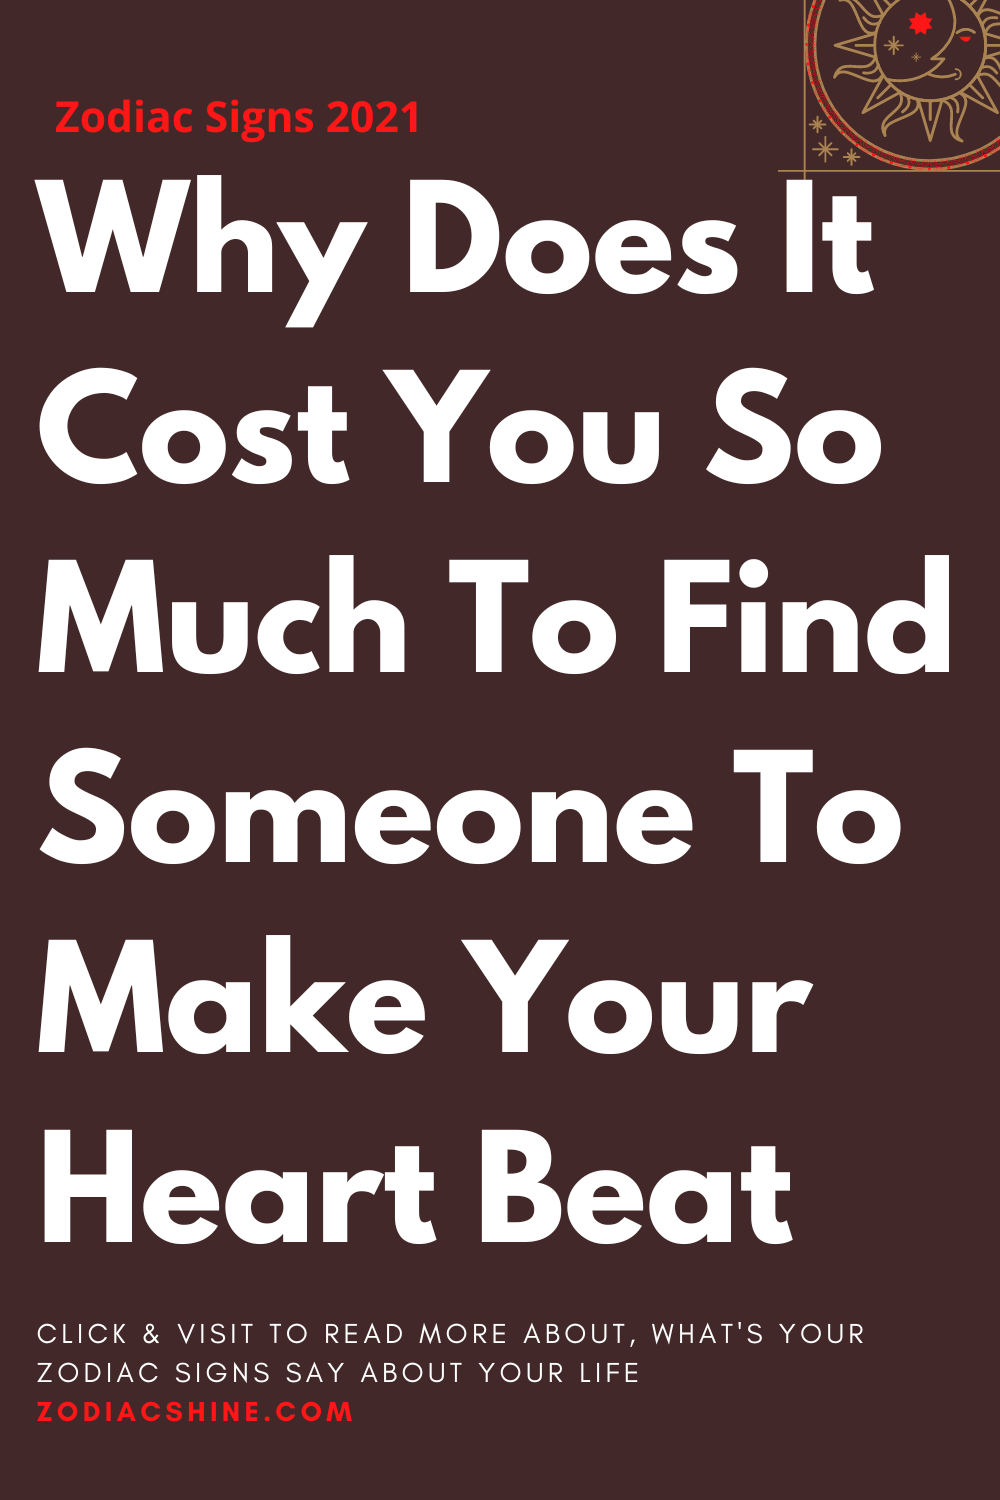 Why Does It Cost You So Much To Find Someone To Make Your Heart Beat